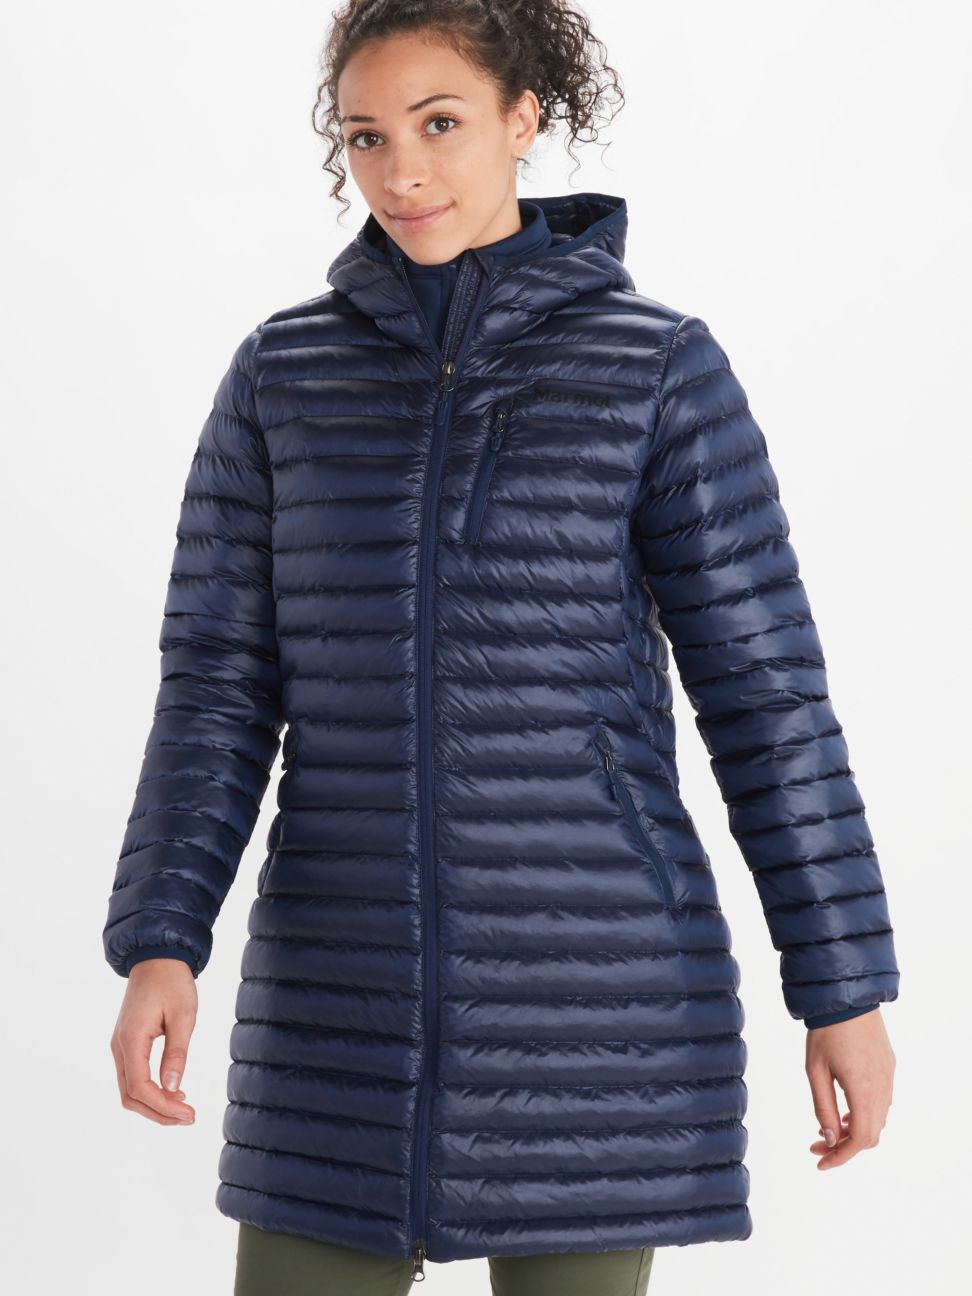 Marmot Cyber Monday Sale: 40-60% off on Almost Everything